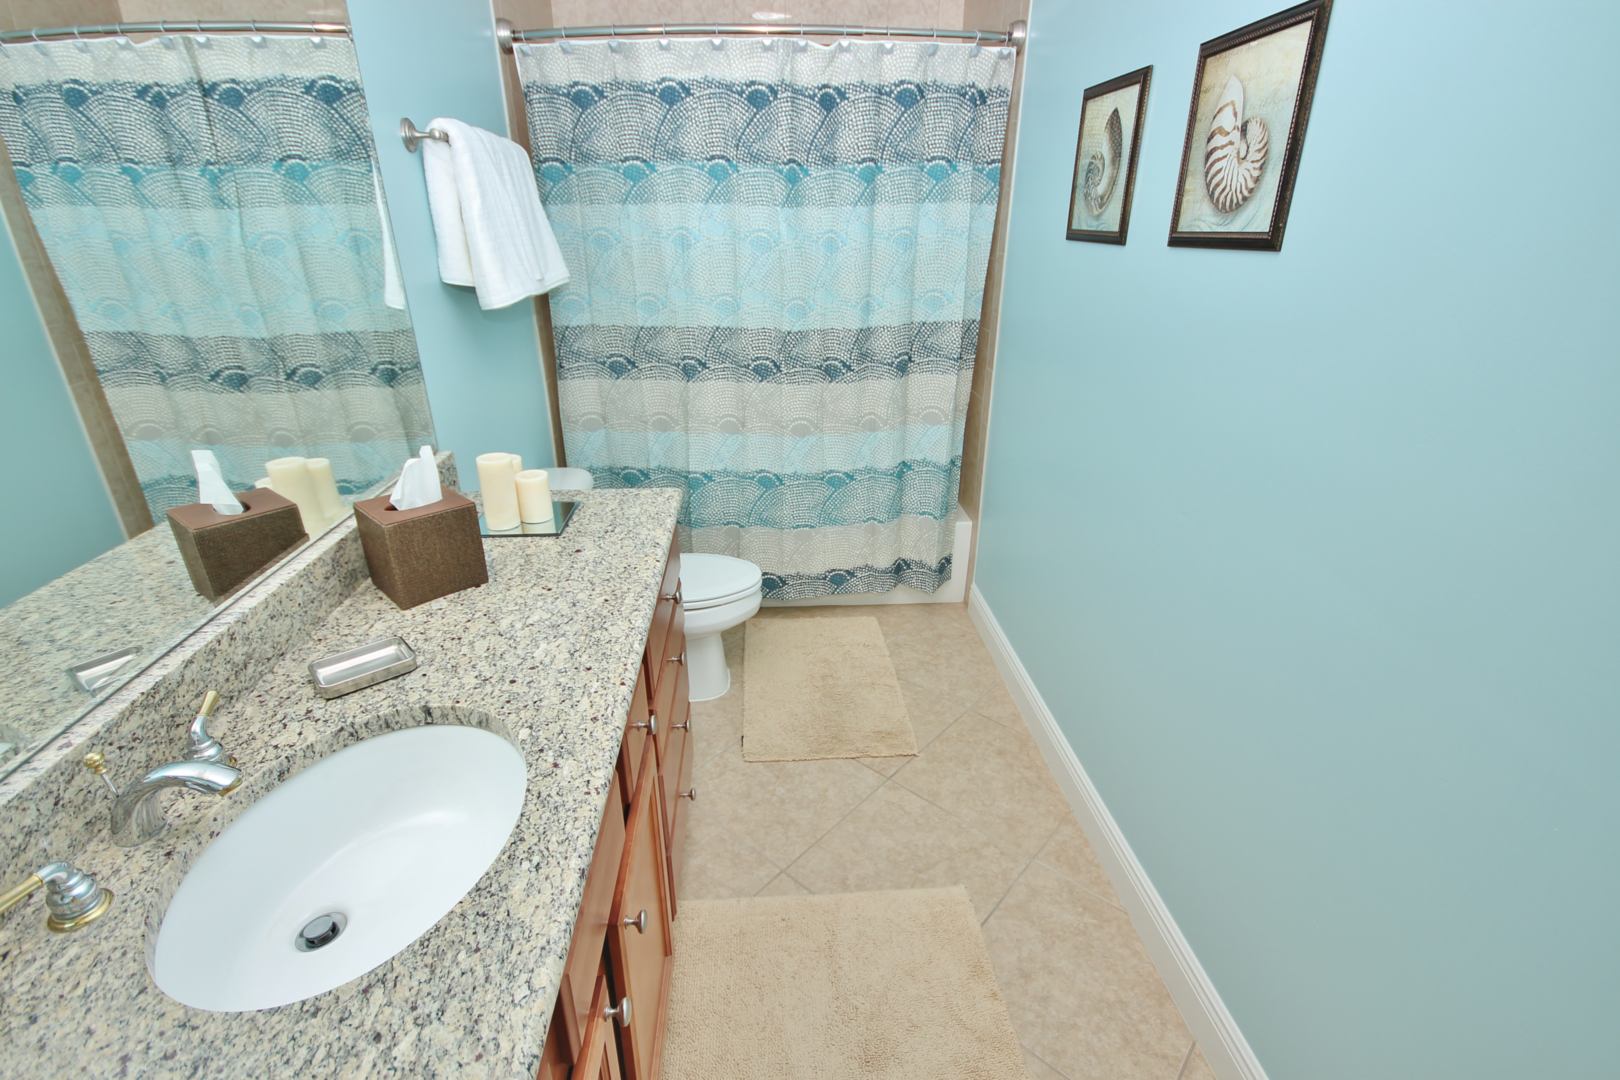 Look at that counterspace in the bathroom!